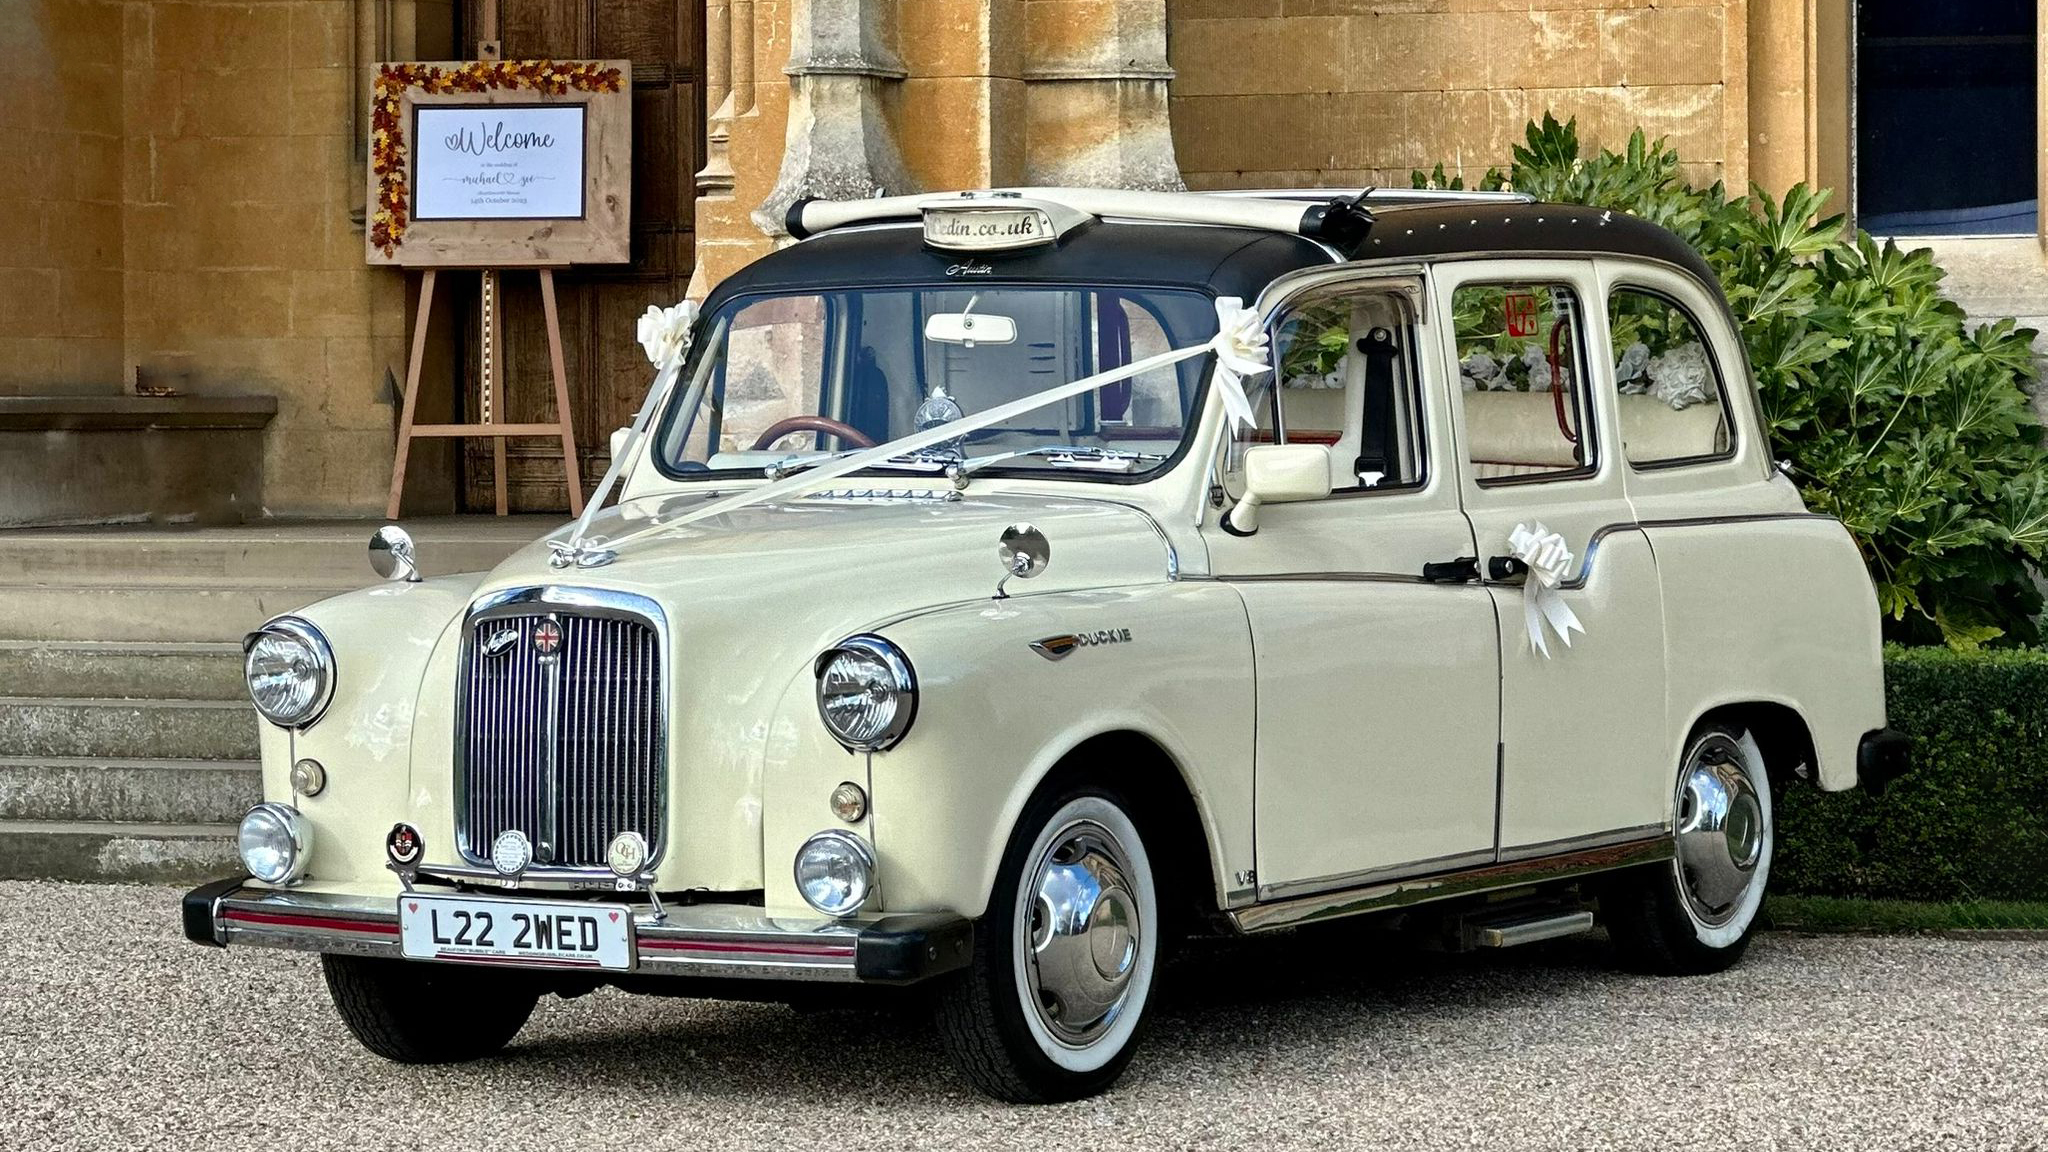 Taxi Cab wedding car for hire in Ilford, London